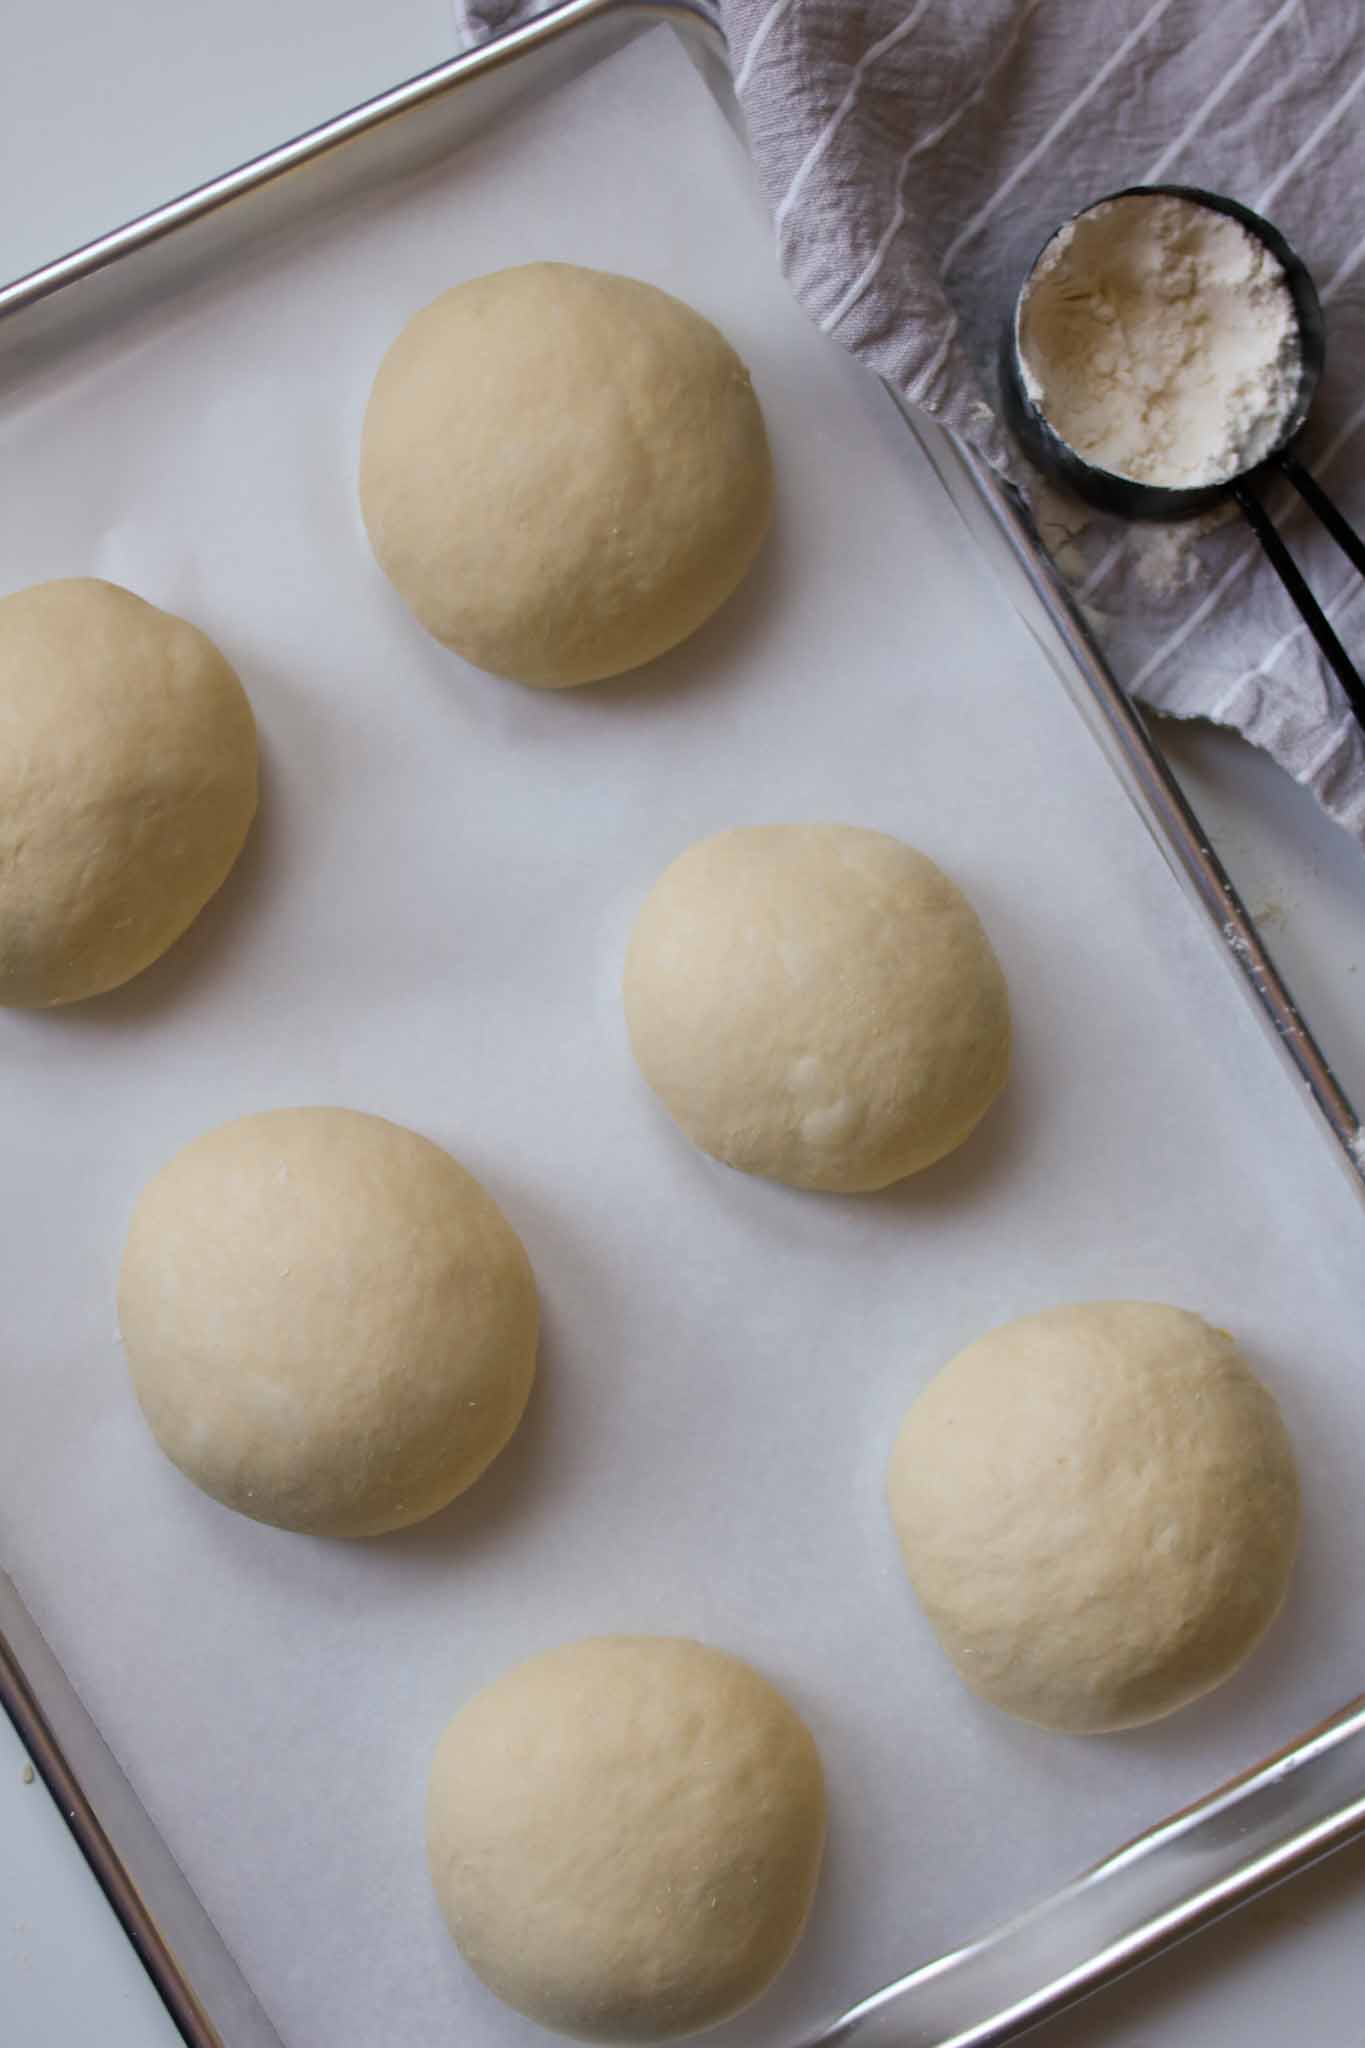 unbaked bread bowls